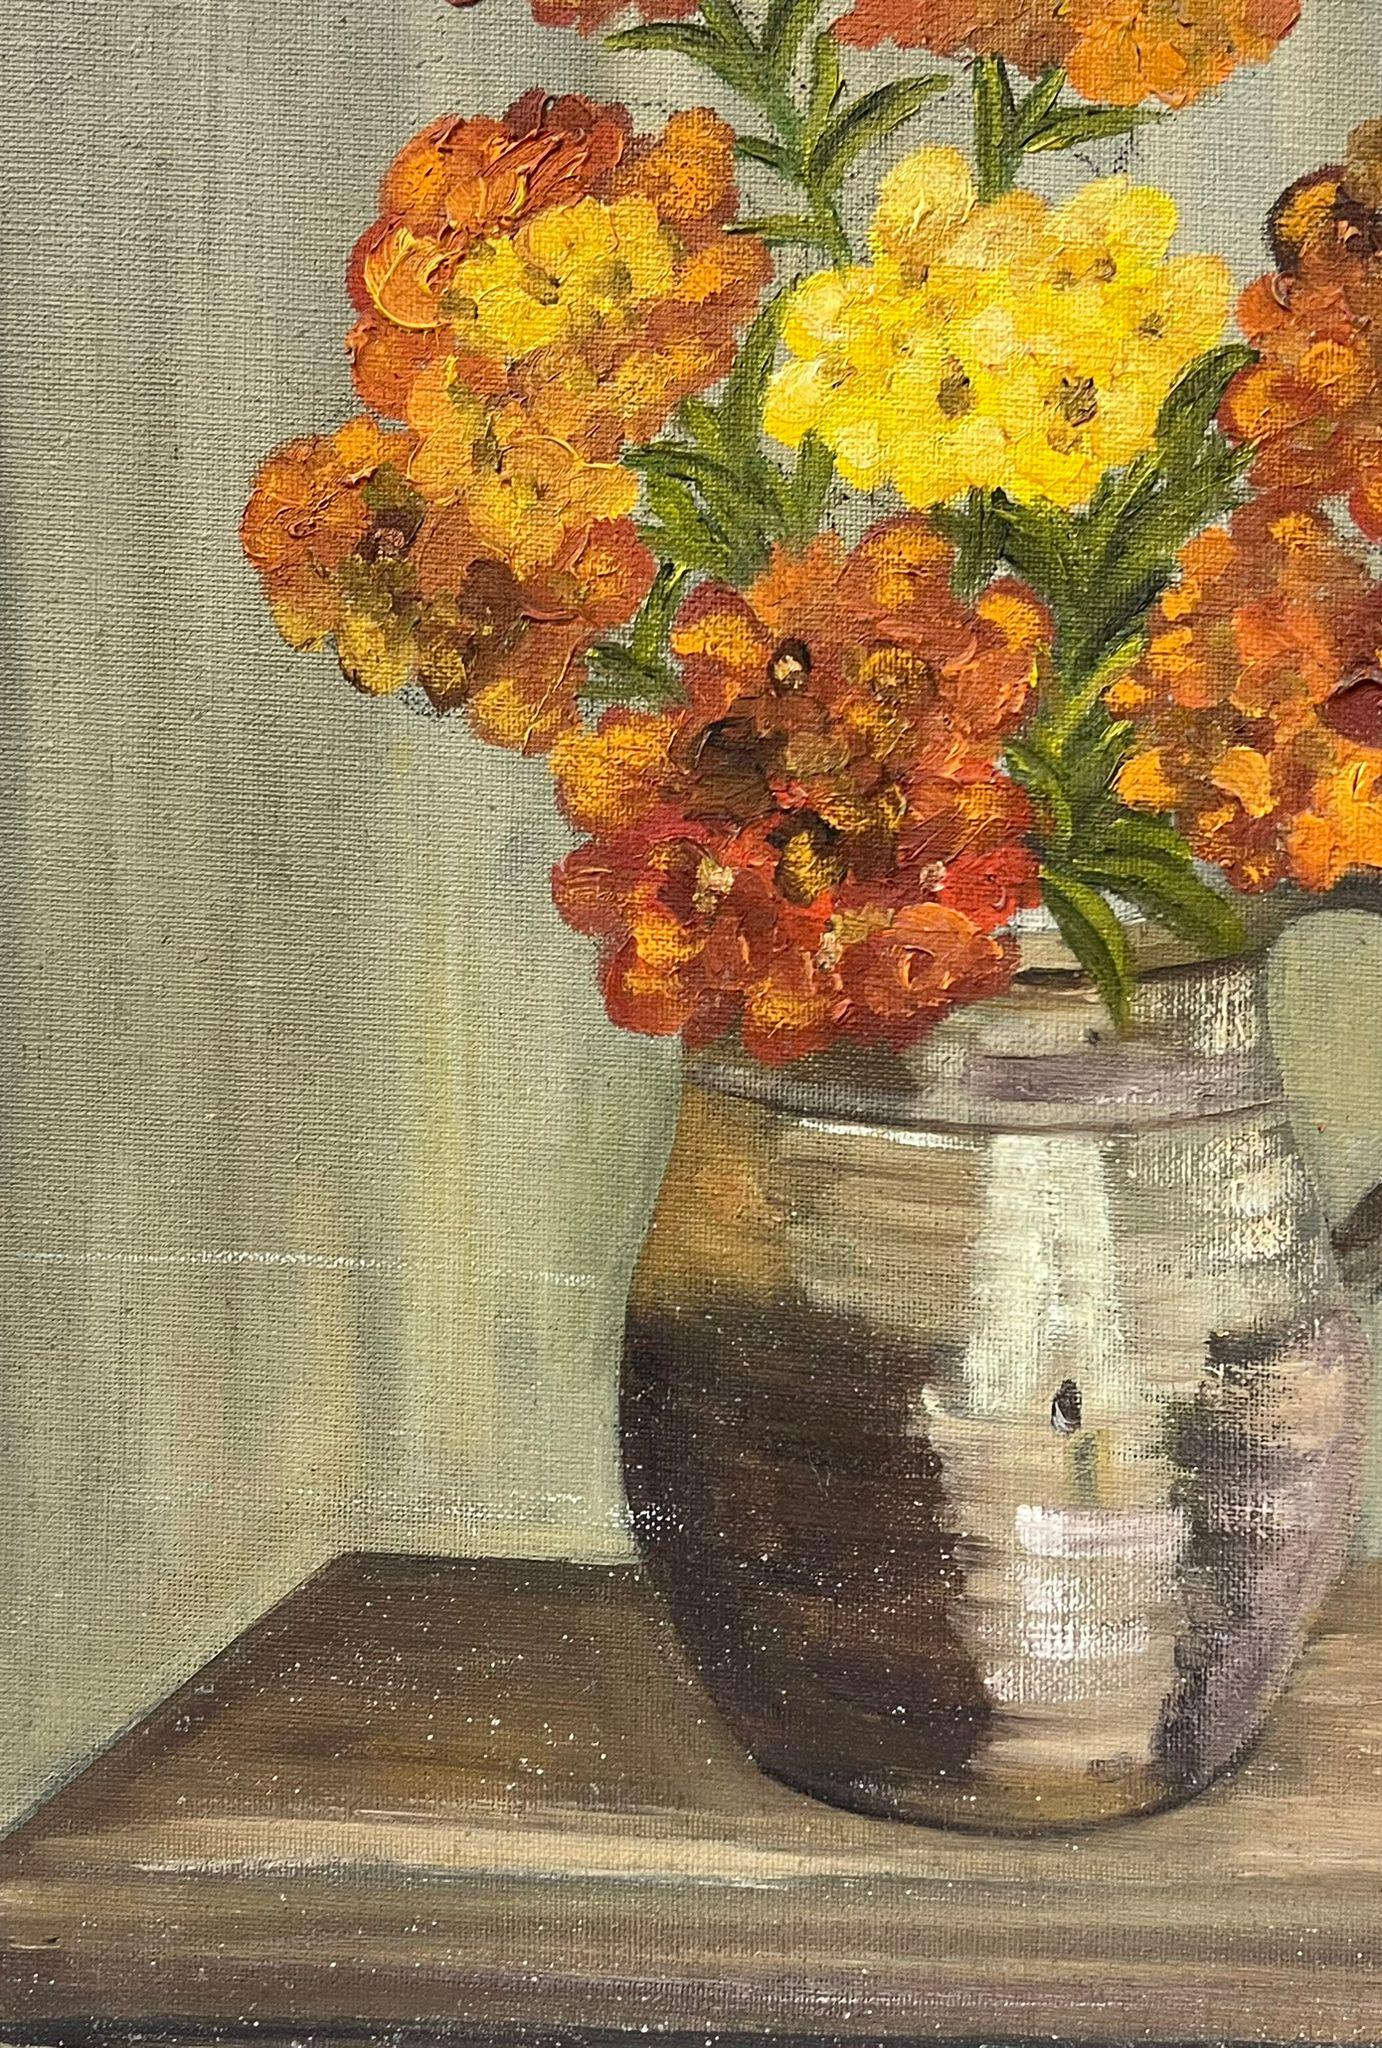 Flowers In Vase
signed oil on board, unframed
board: 18 x 13 inches
provenance: private collection
condition: very good and sound condition 